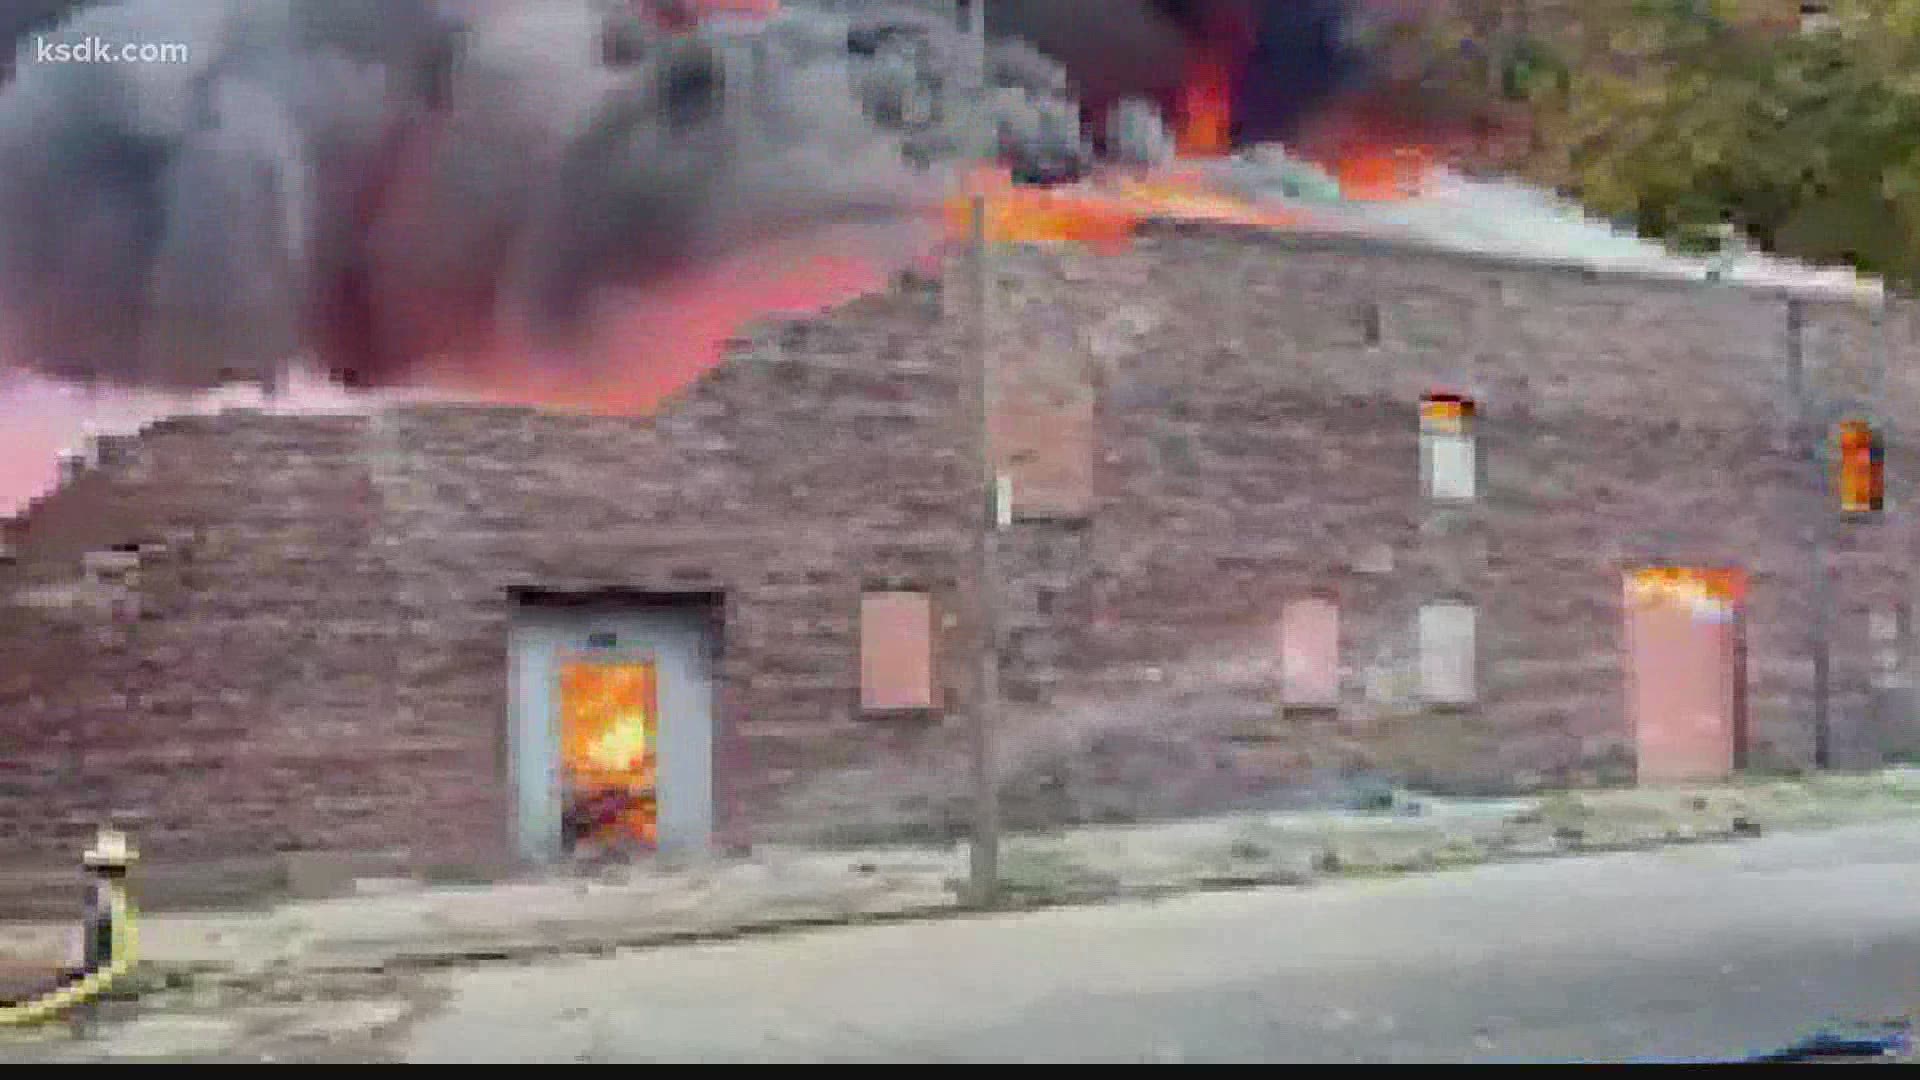 The St. Louis Fire Department shared a video showing flames and heavy smoke coming from the warehouse